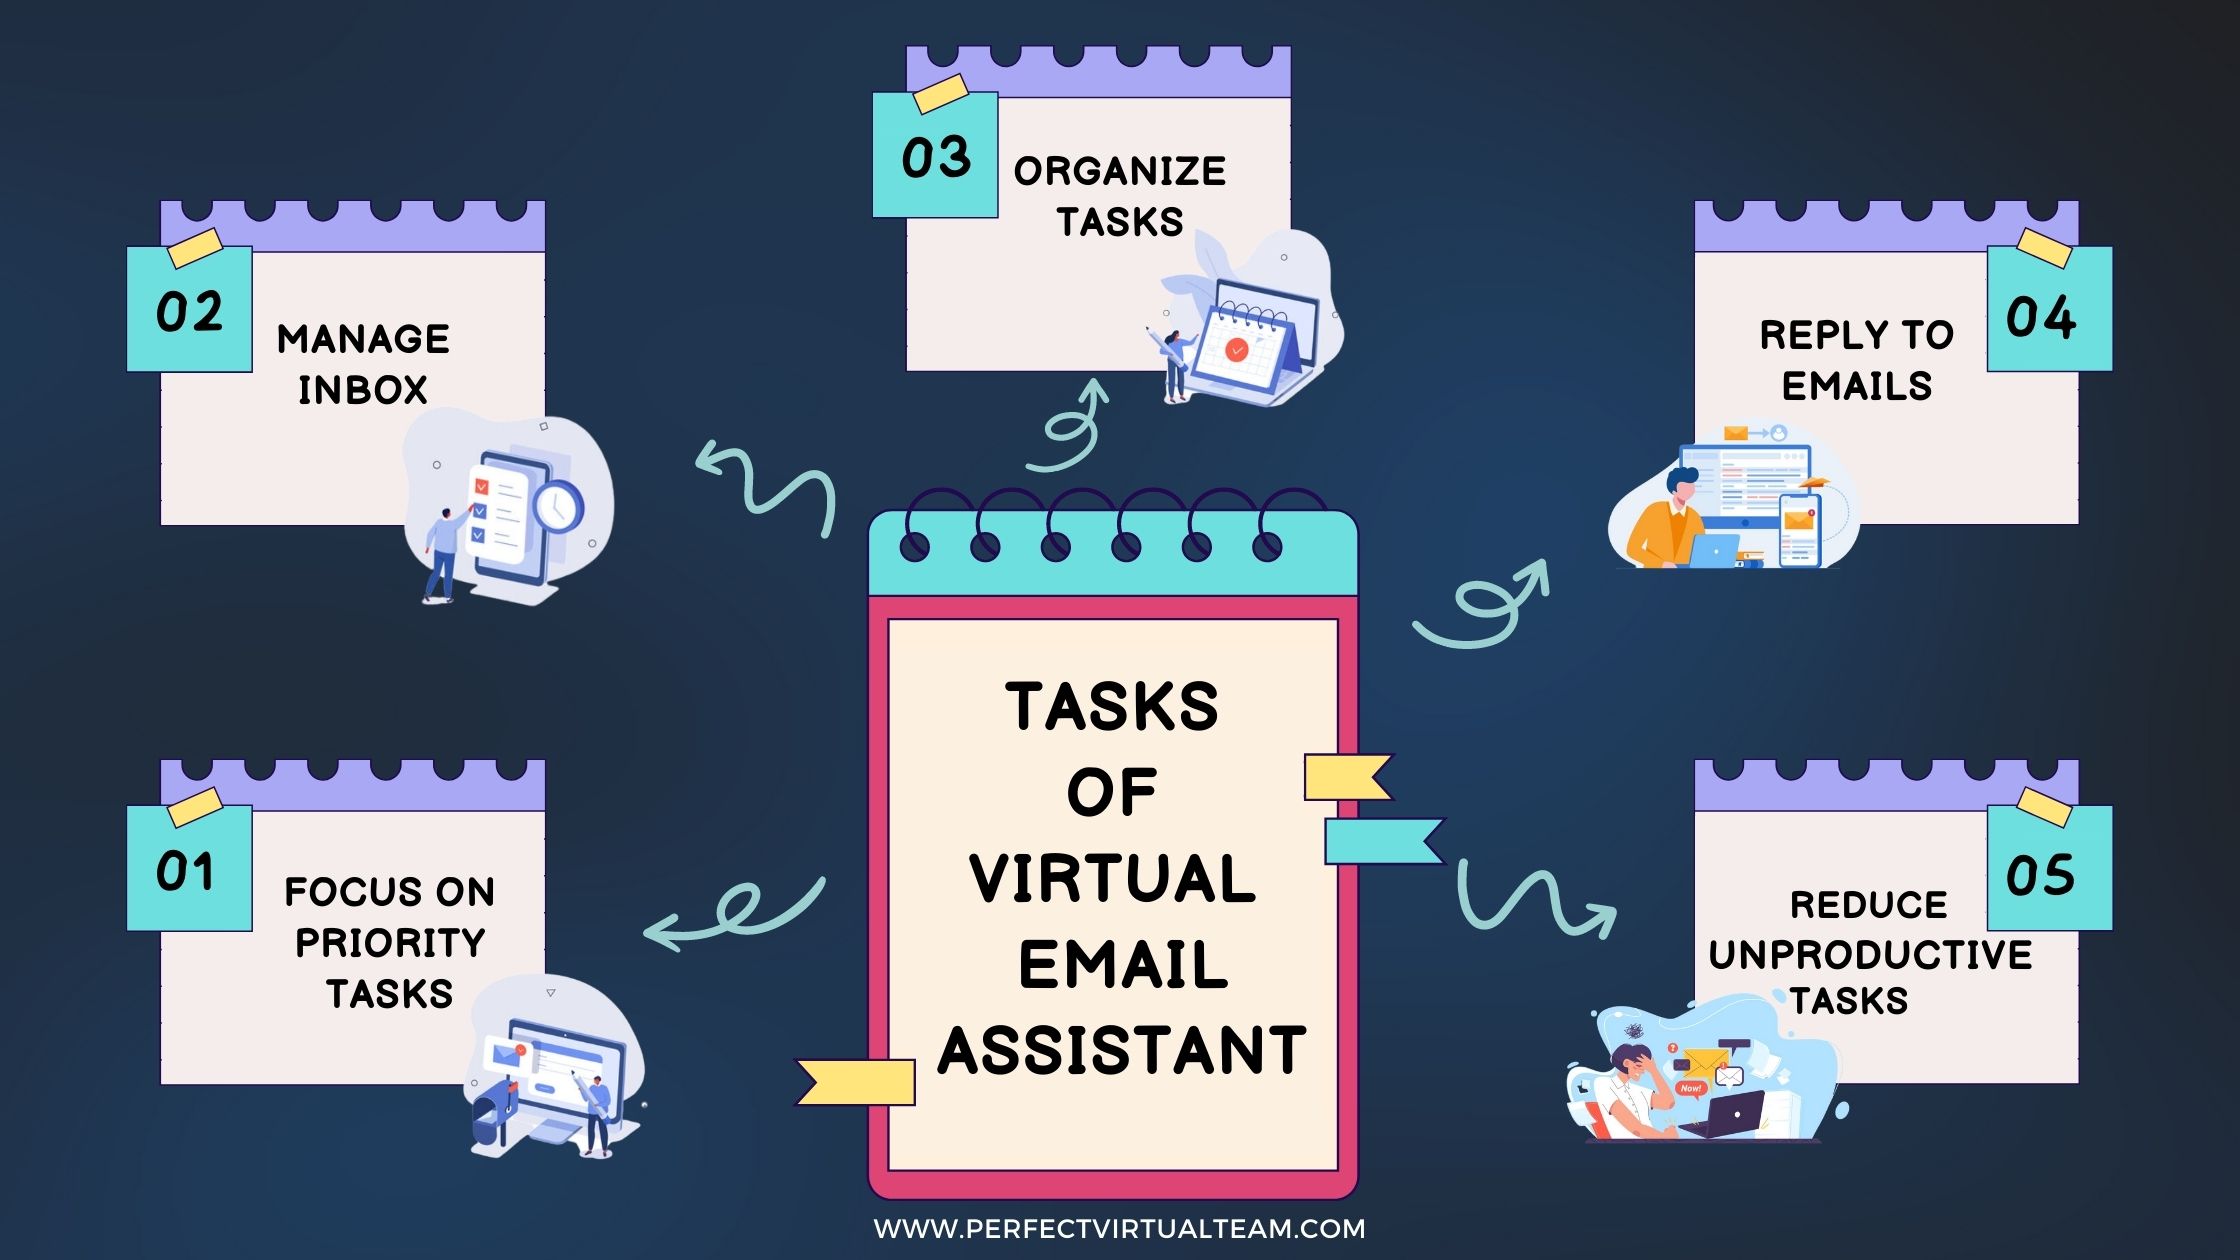 Tasks handled by Virtual Email Assistant 